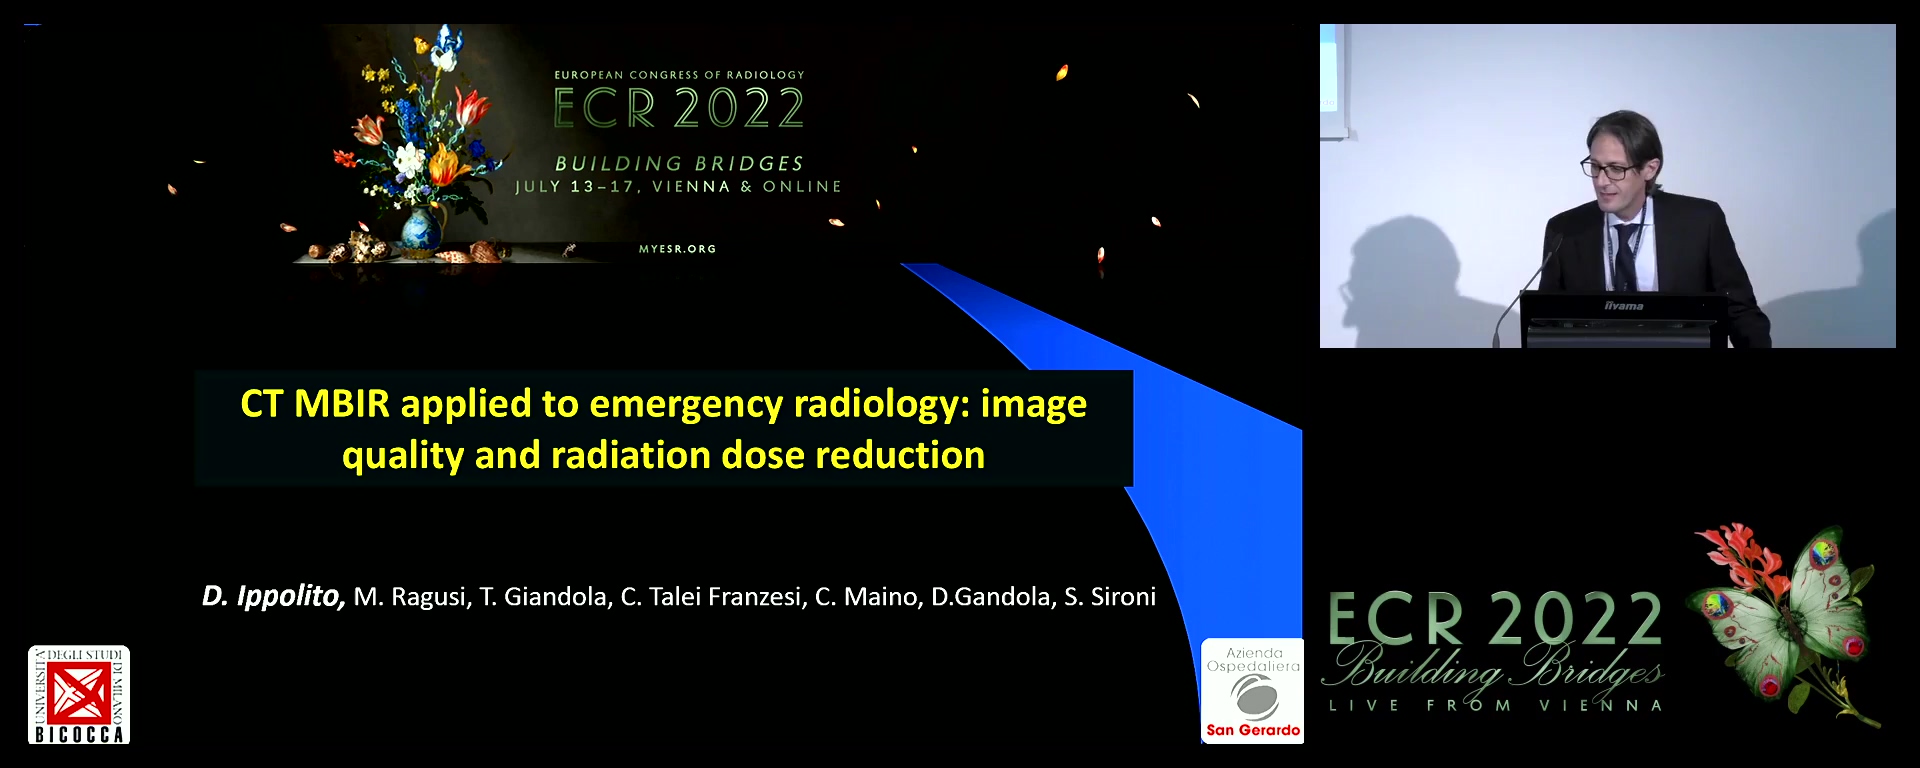 CT MBIR applied to emergency radiology: image quality and radiation dose reduction - Davide Ippolito, Vedano Al Lambro / IT